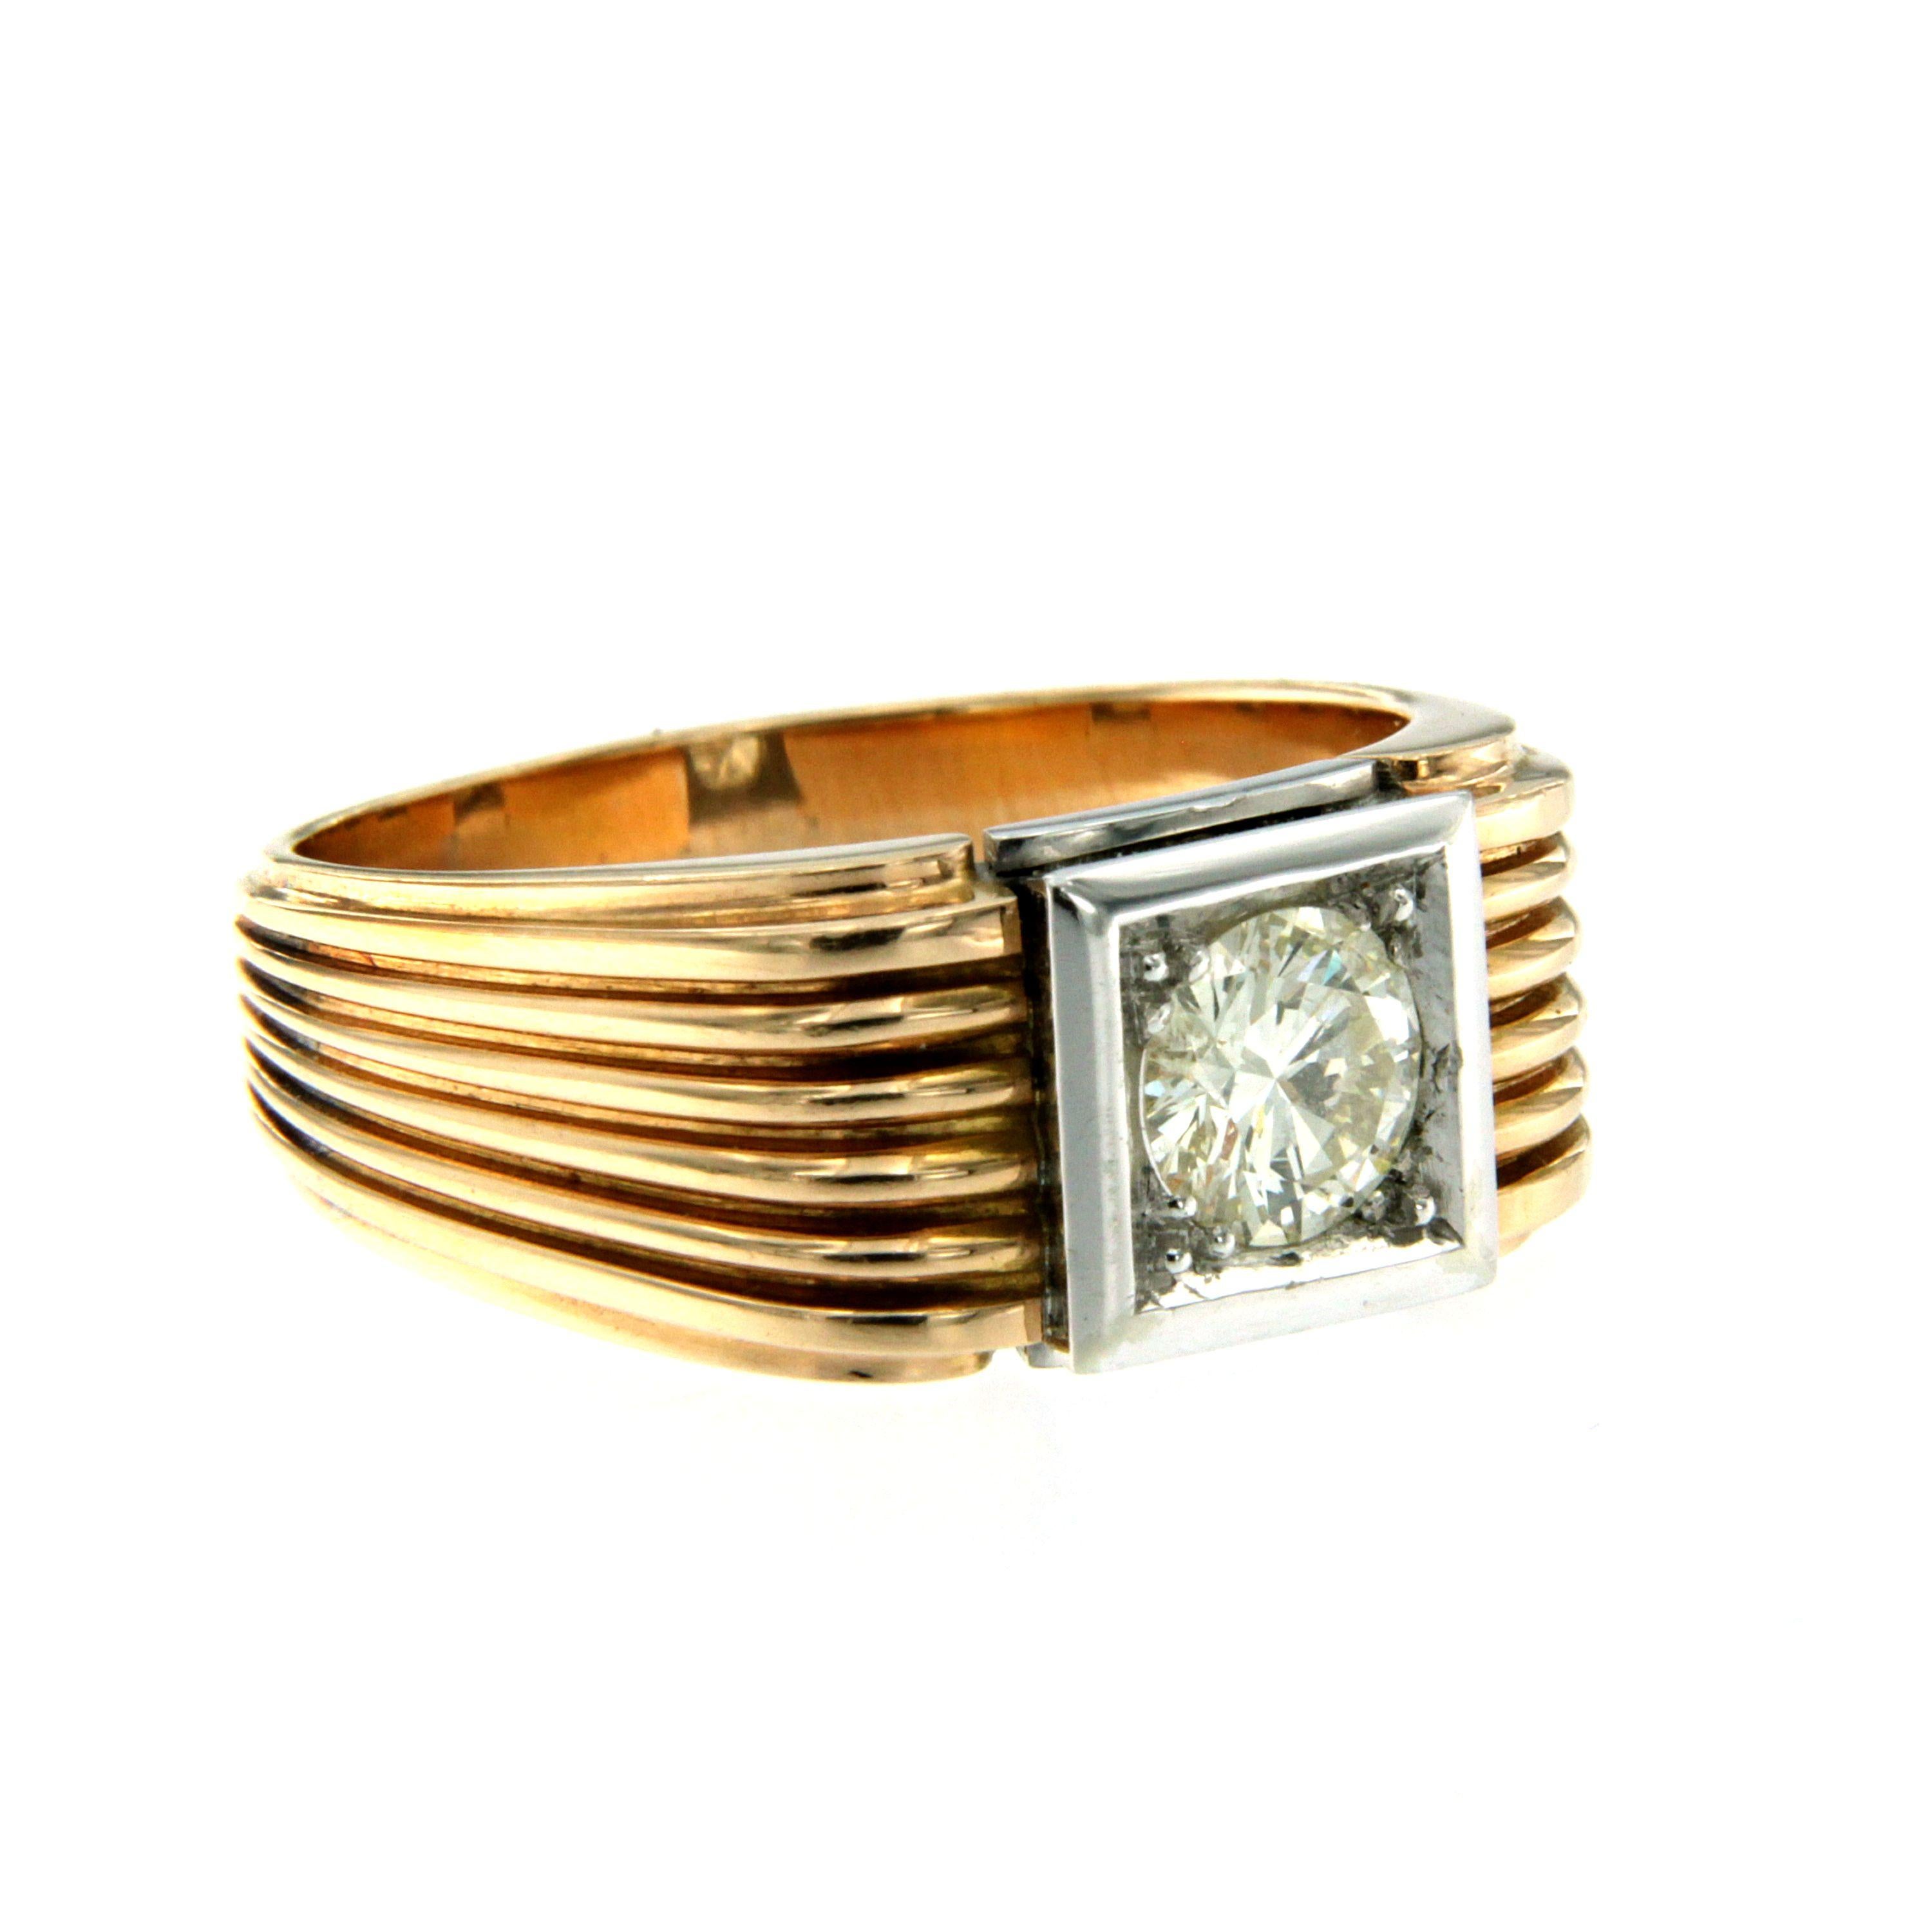 Unique unisex Art Deco setting featuring a very beautiful and different wave design. This ring is hand-crafted in 18k white and rose gold, authentic from 1930, featuring in the center a sparkling Old European brilliant cut Diamond weighing approx.